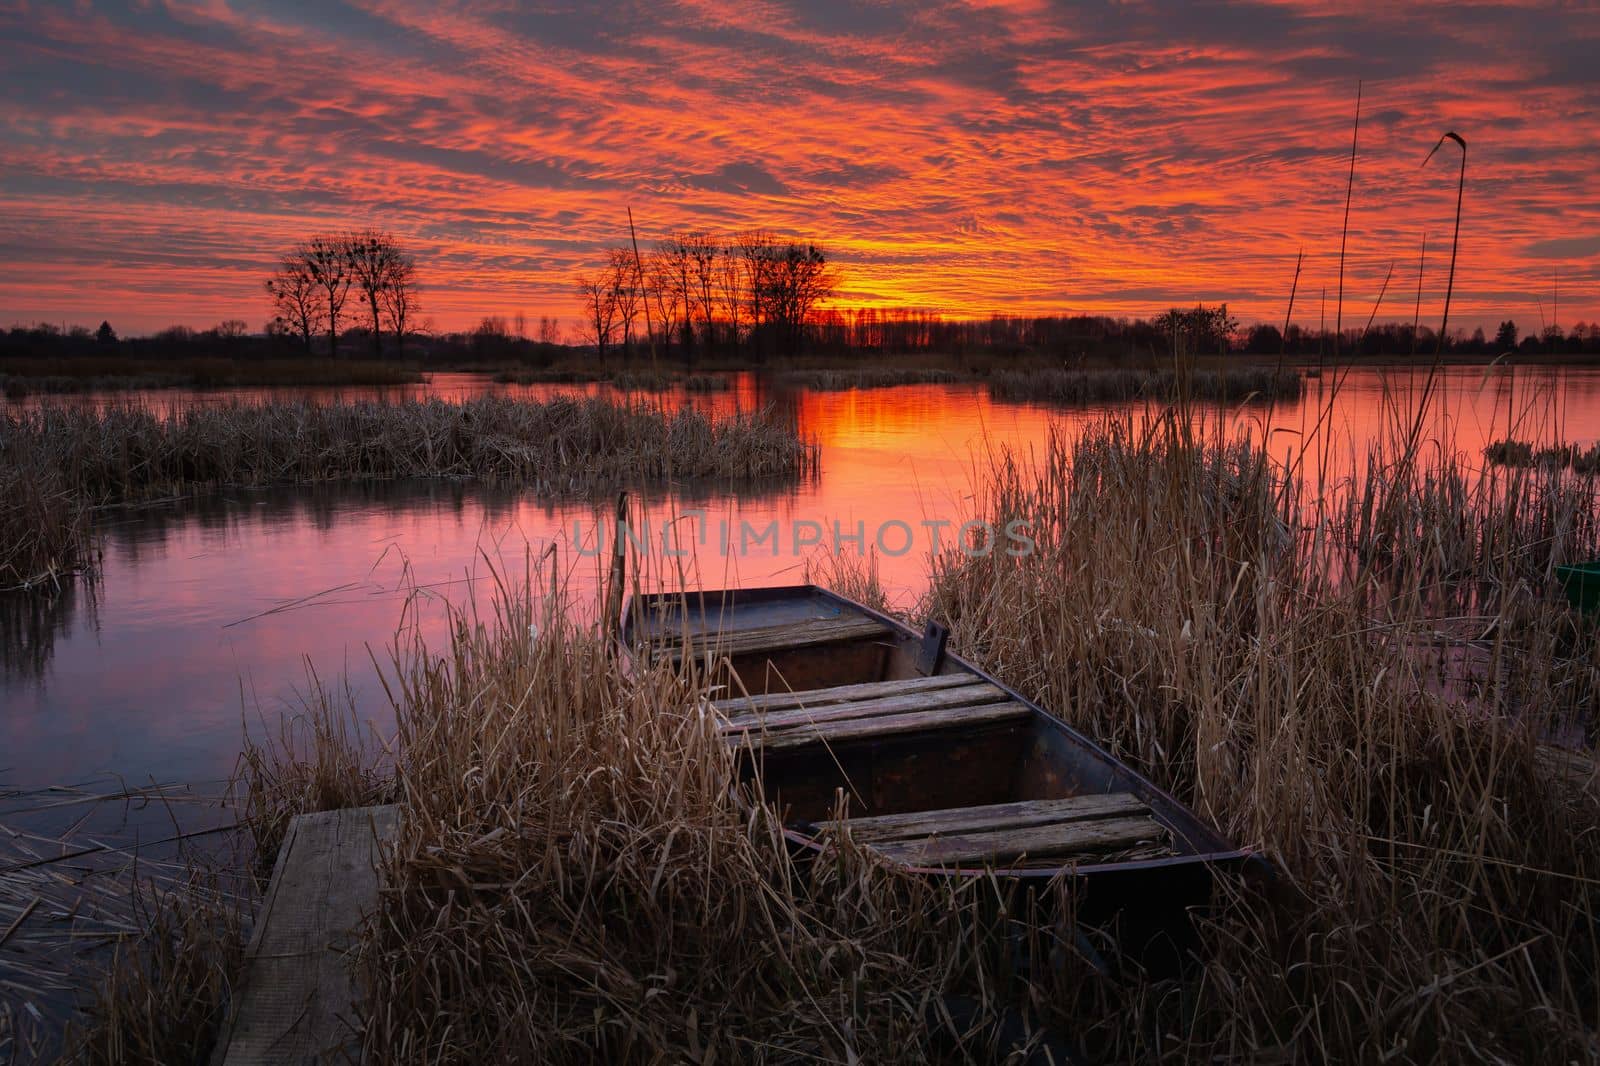 An old boat in the reeds on the lake shore and a beautiful sunset by darekb22